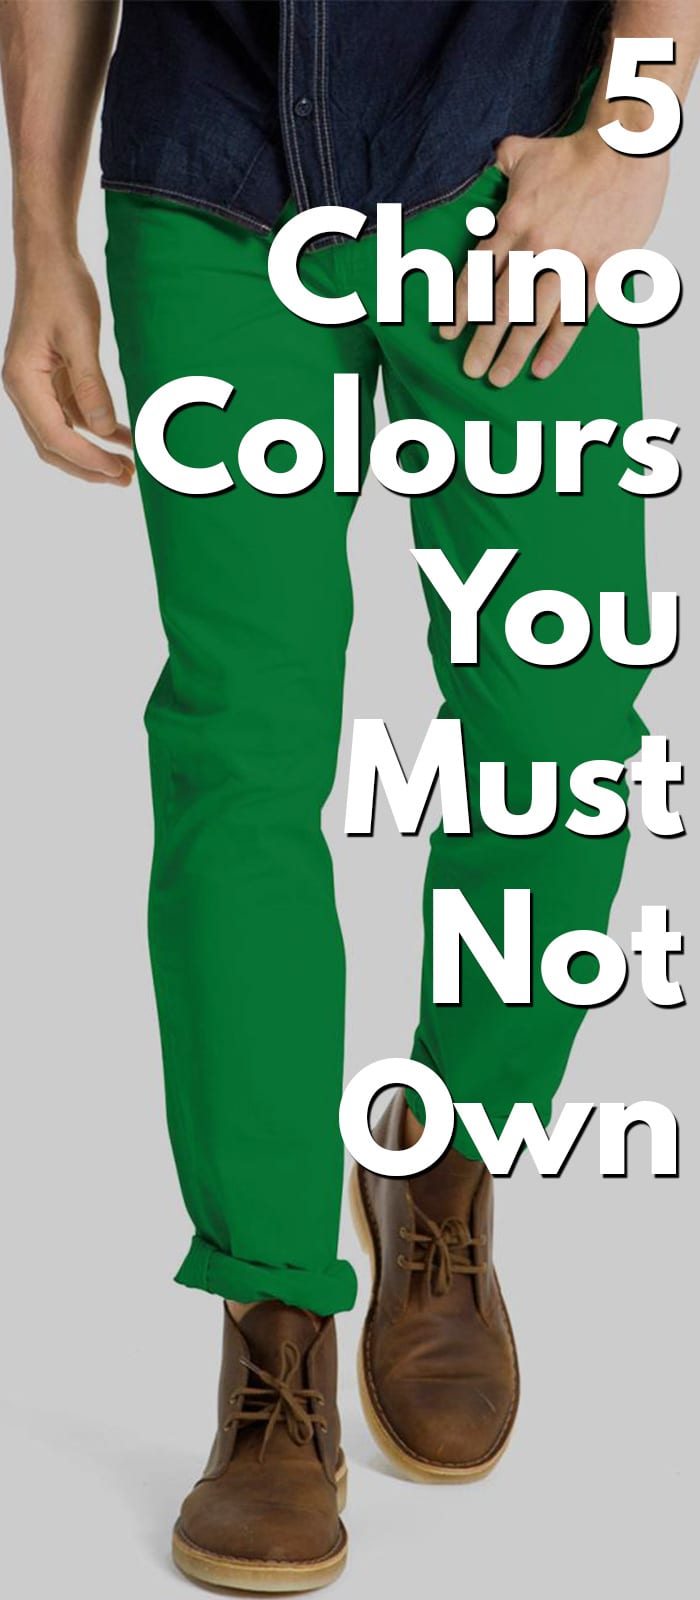 5 chino colours you should not buy